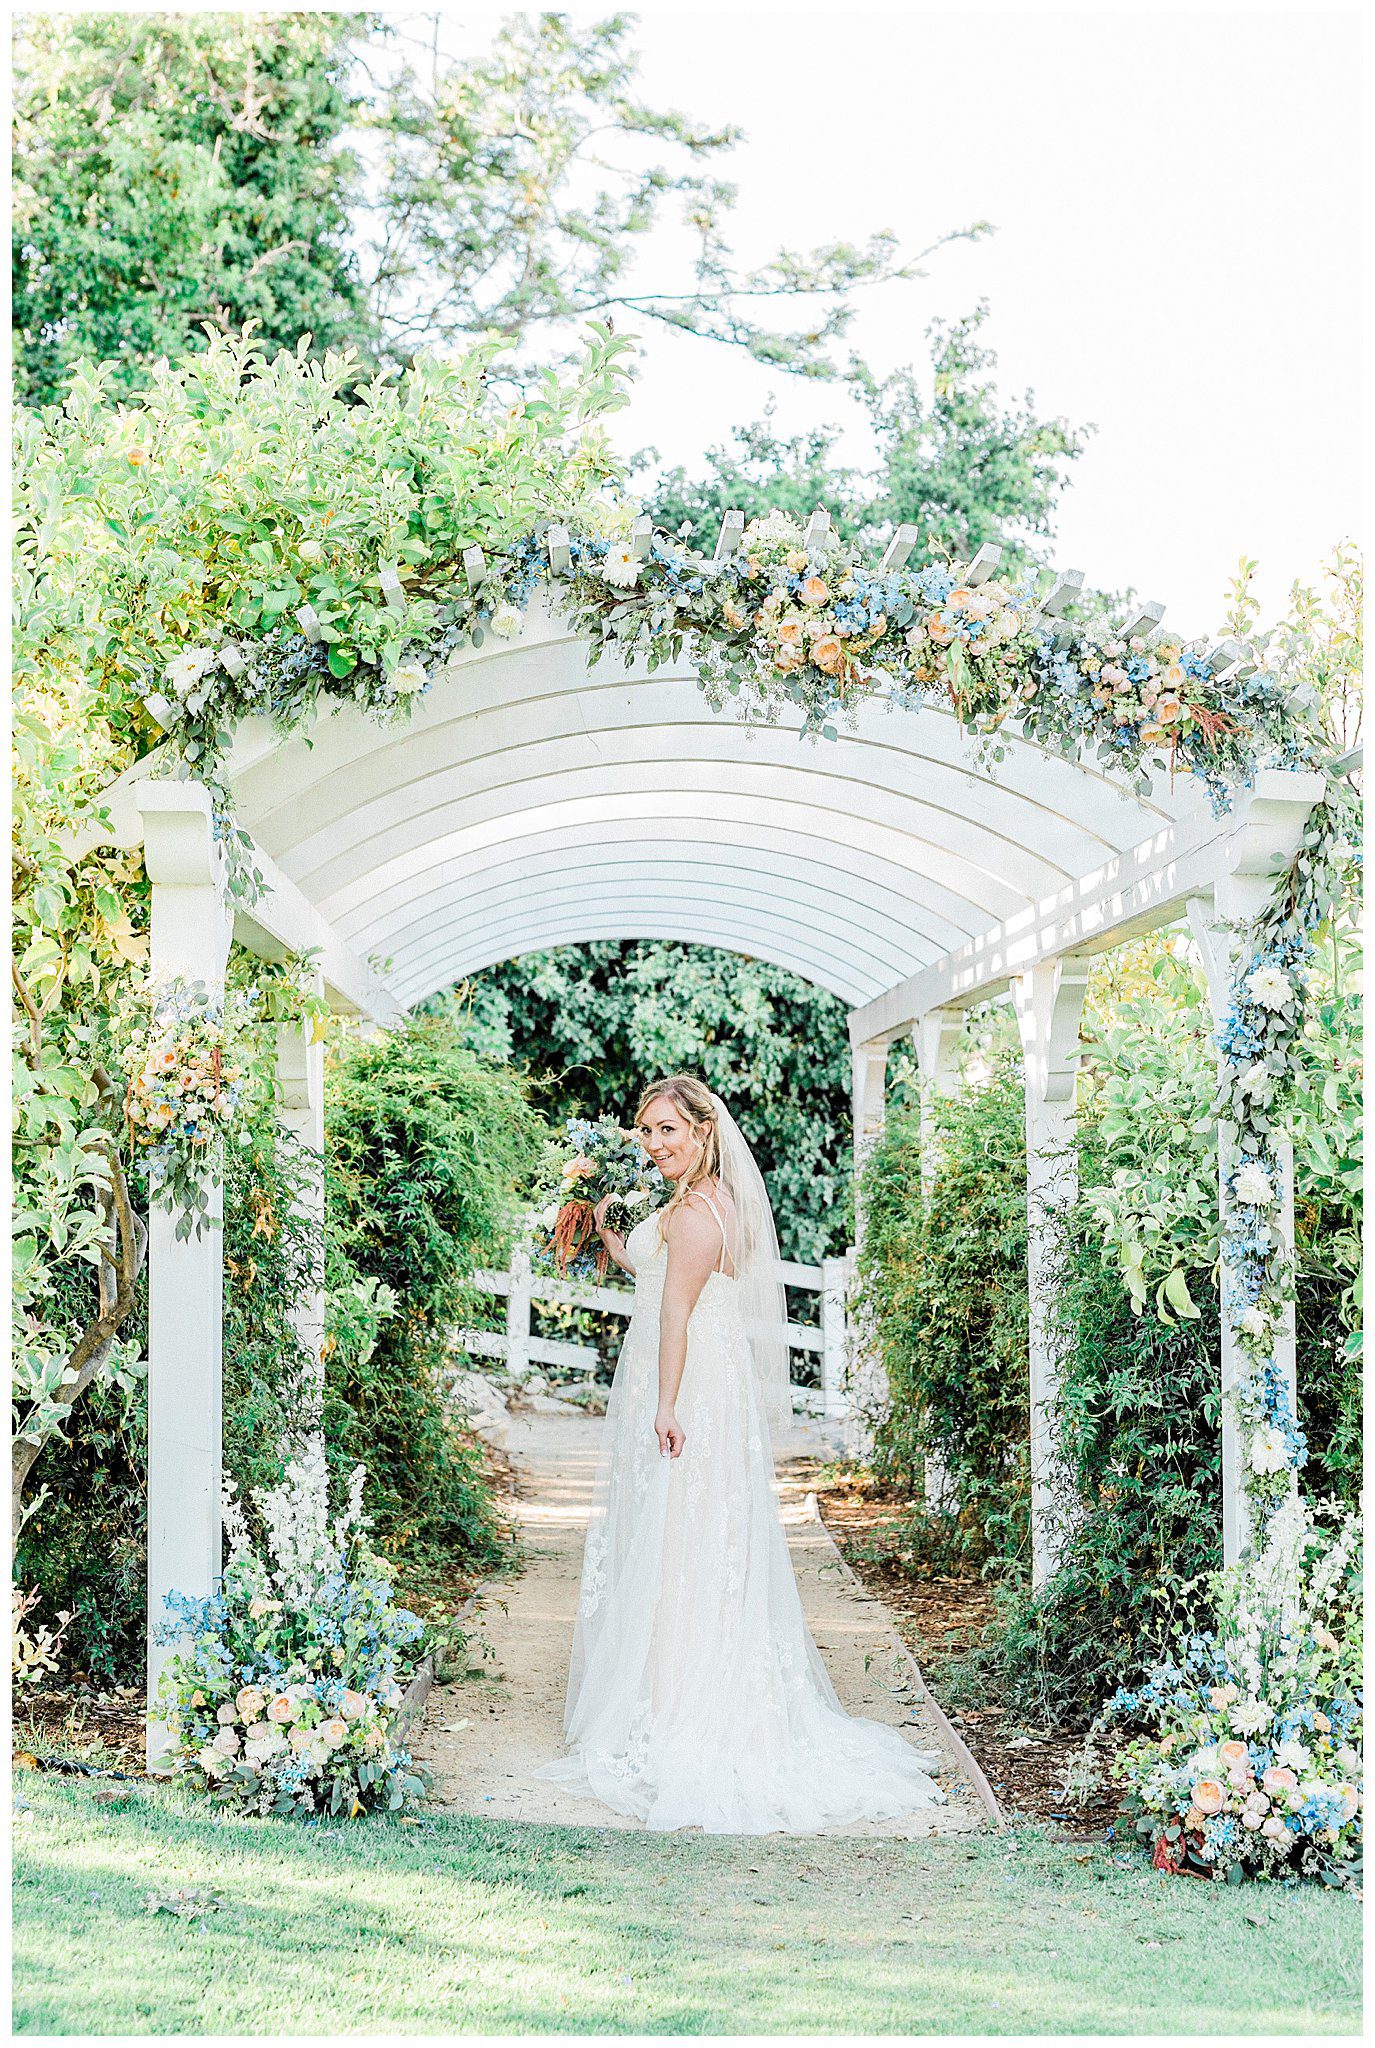 A bride under the arbor in the secret garden at the Madonna Inn, wearing her wedding dress and holding a bouquet of spring flowers.